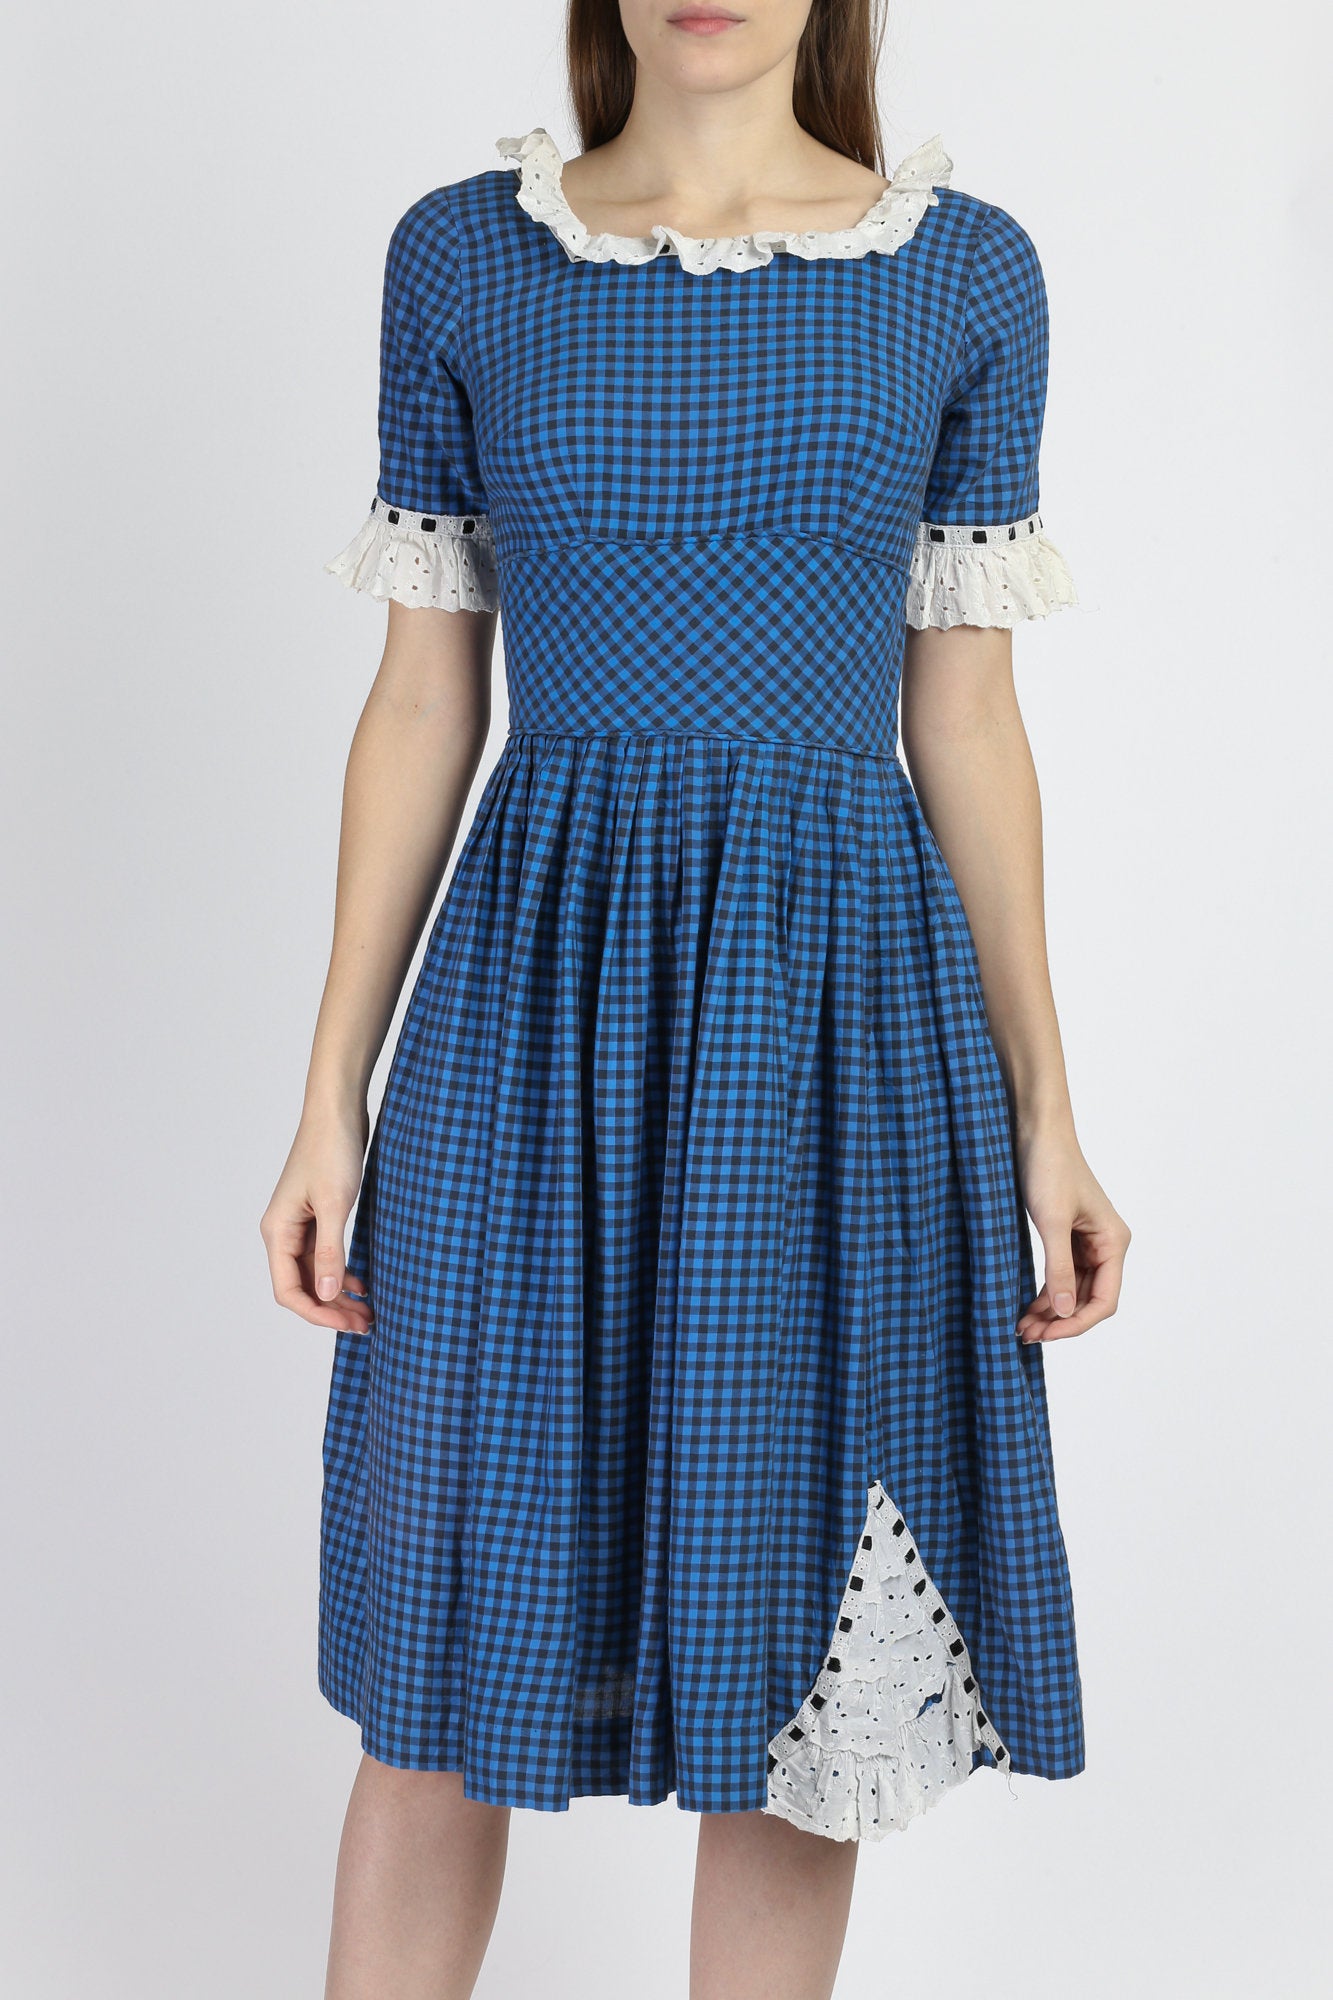 1950s Blue Gingham Checkered Day Dress - XS to Small